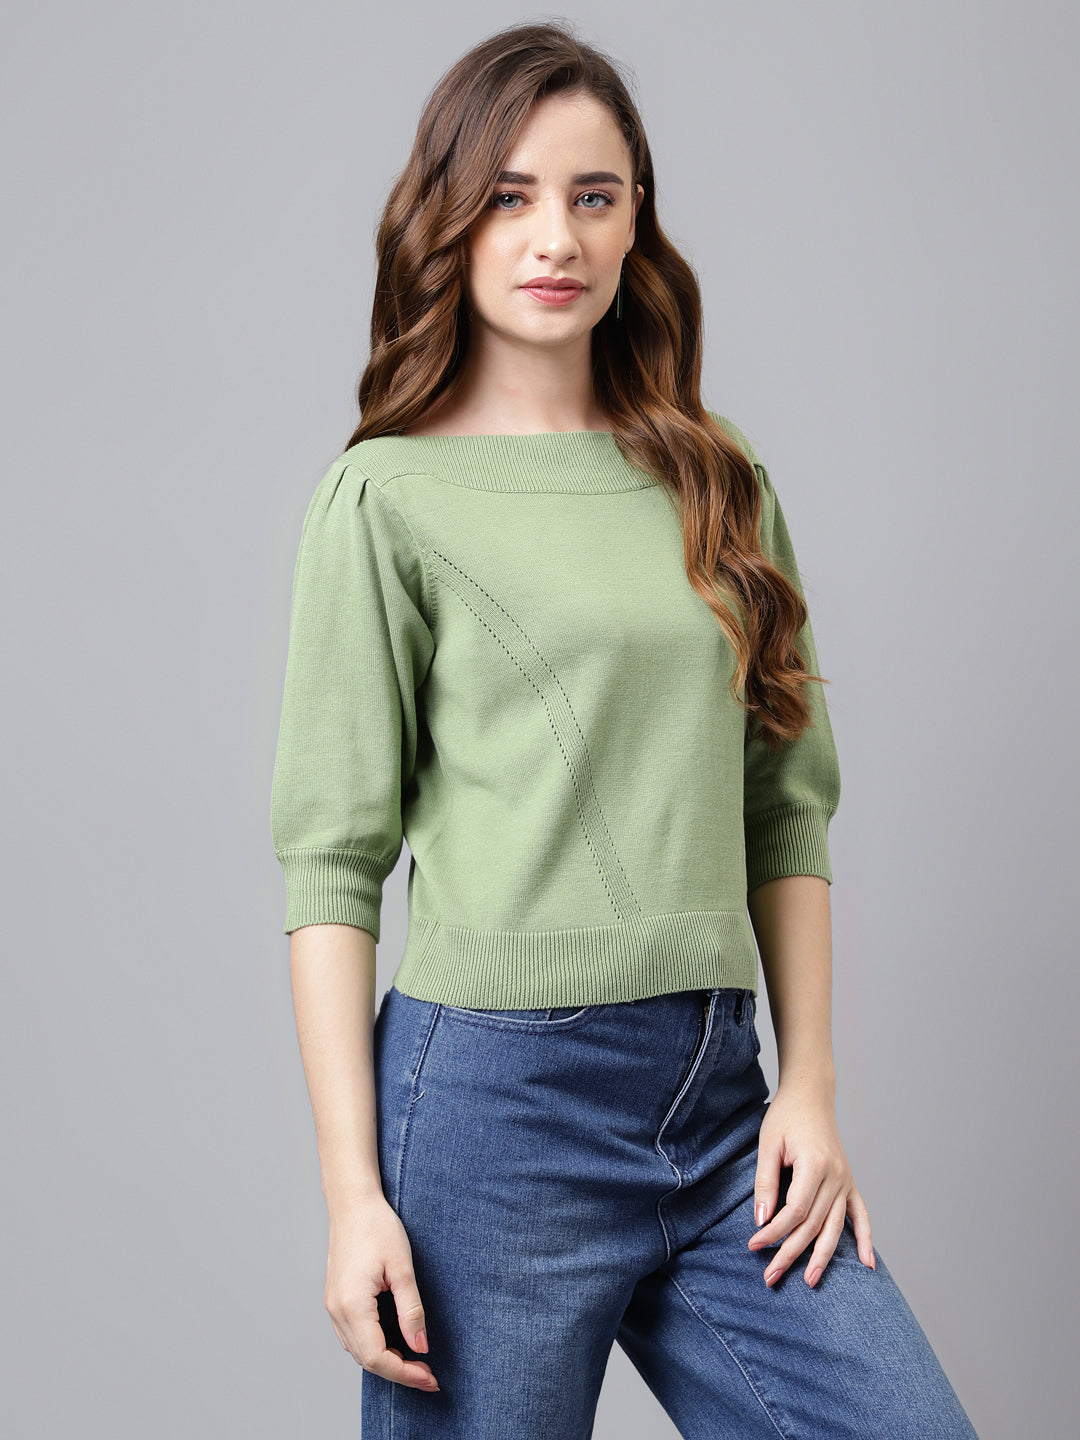 3/4 Sleeves Green Sweater Top